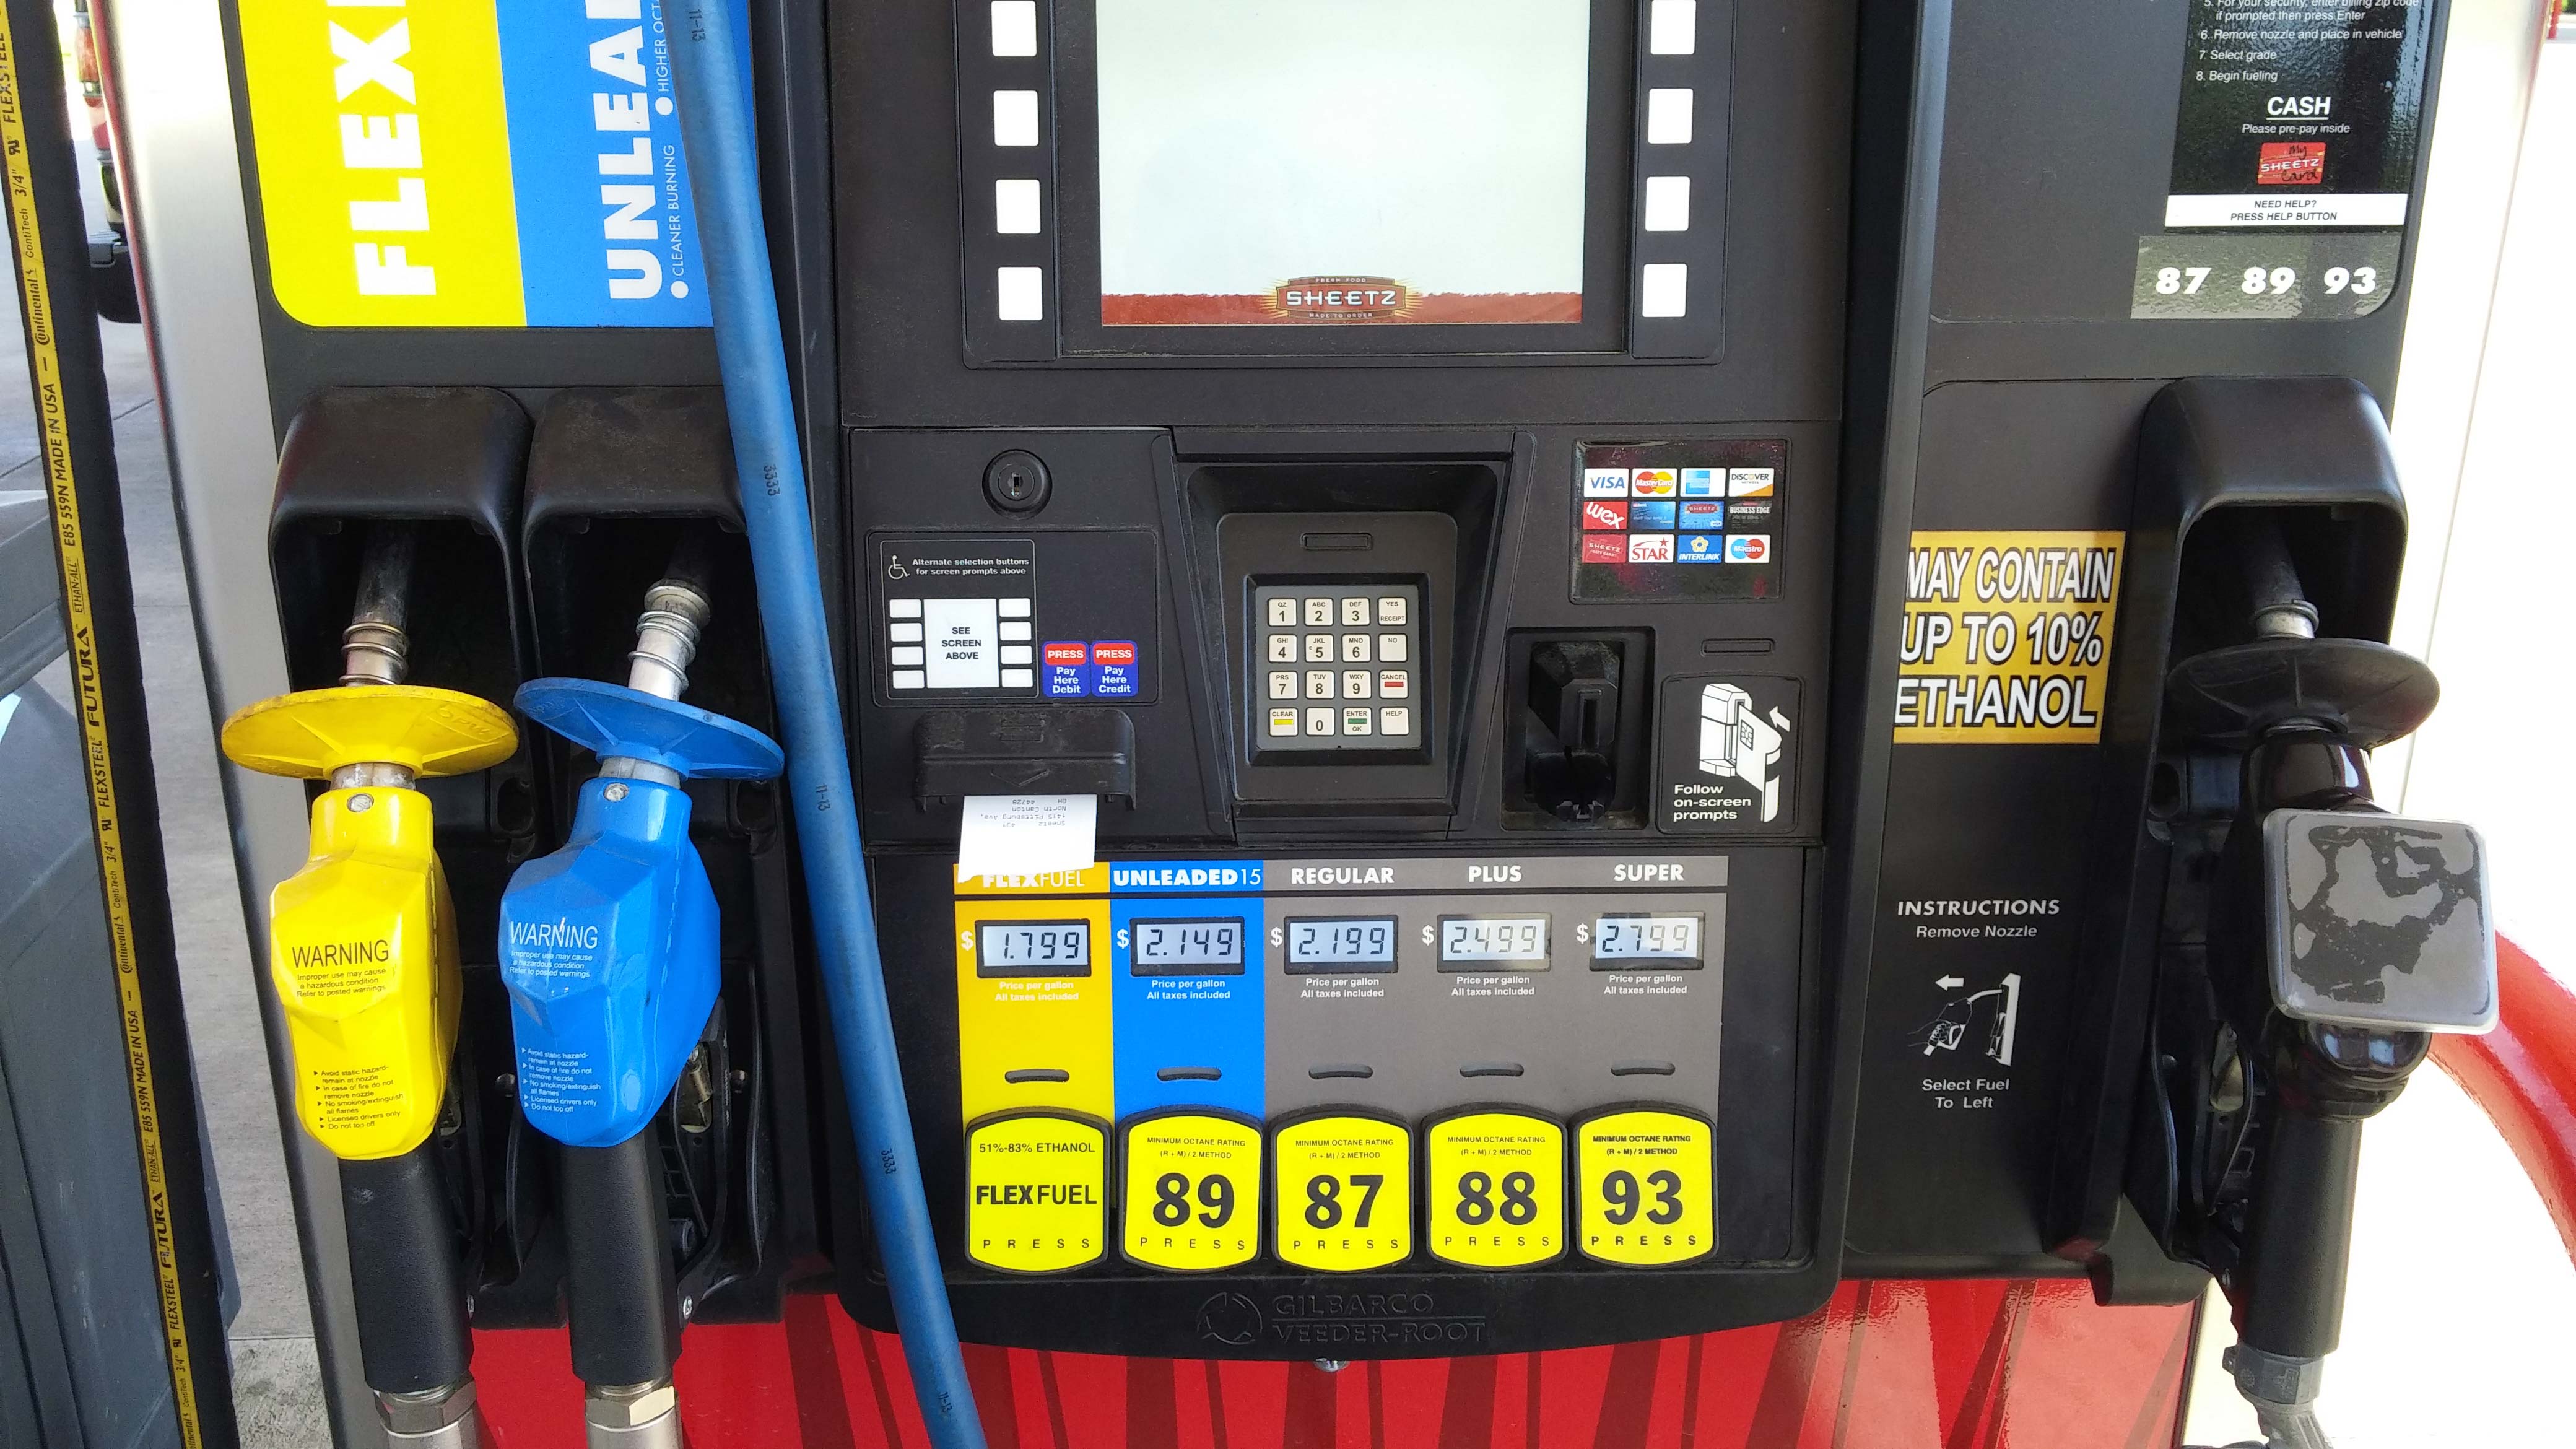 Just how easy is it to misfuel your boat? This gas pump in Ohio has no required E15 warning label and simply selecting the 89-octane grade fuel would be illegal, likely void your boat motor’s warranty, and may lead to engine damage (credit: D.A. Saus).